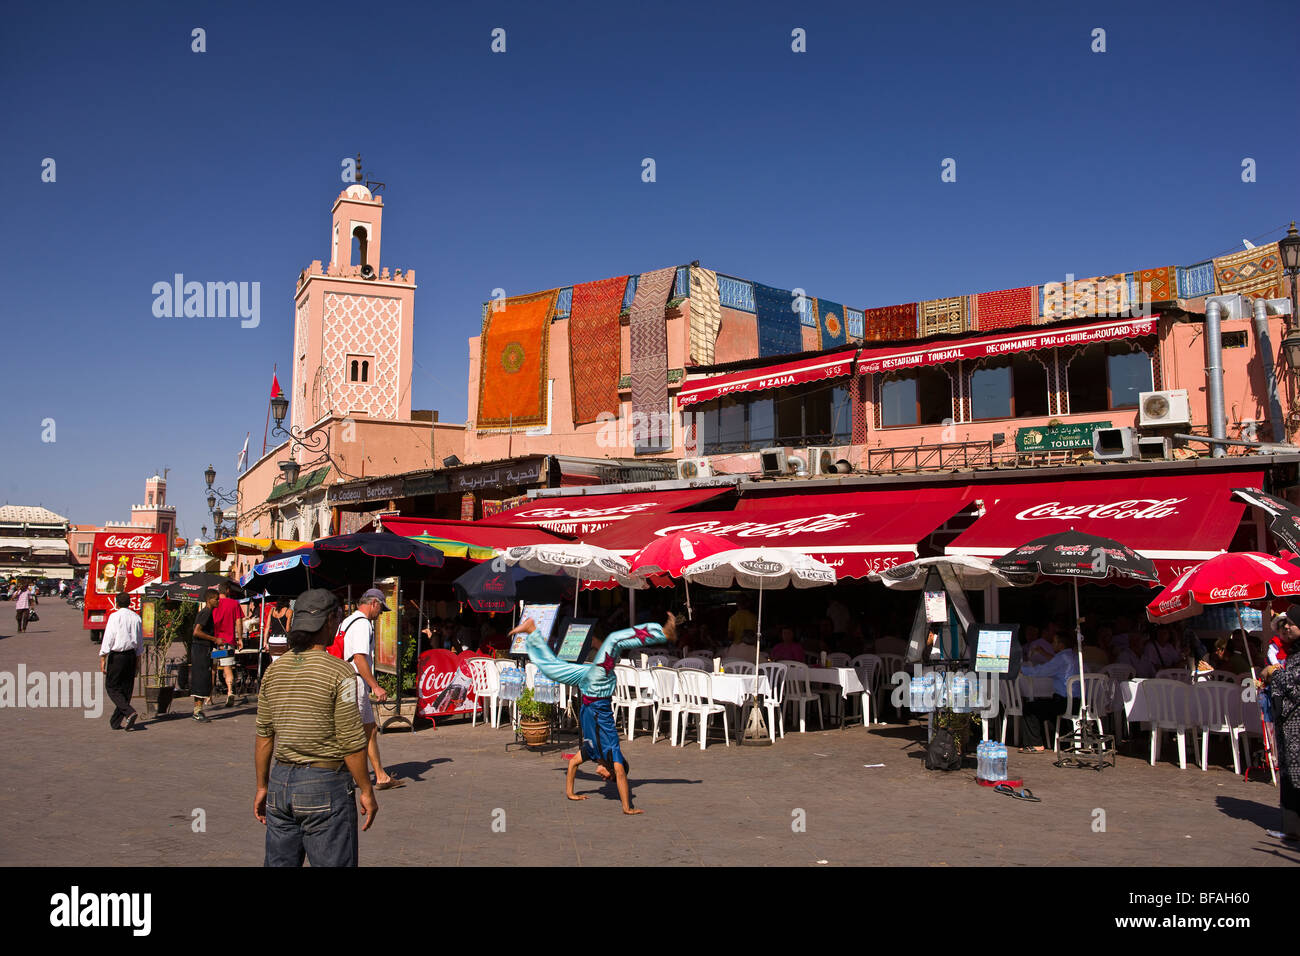 MARRAKESH, MOROCCO - Acrobat tumbling in front of cafe, Djemaa el-Fna main square in the medina. Stock Photo